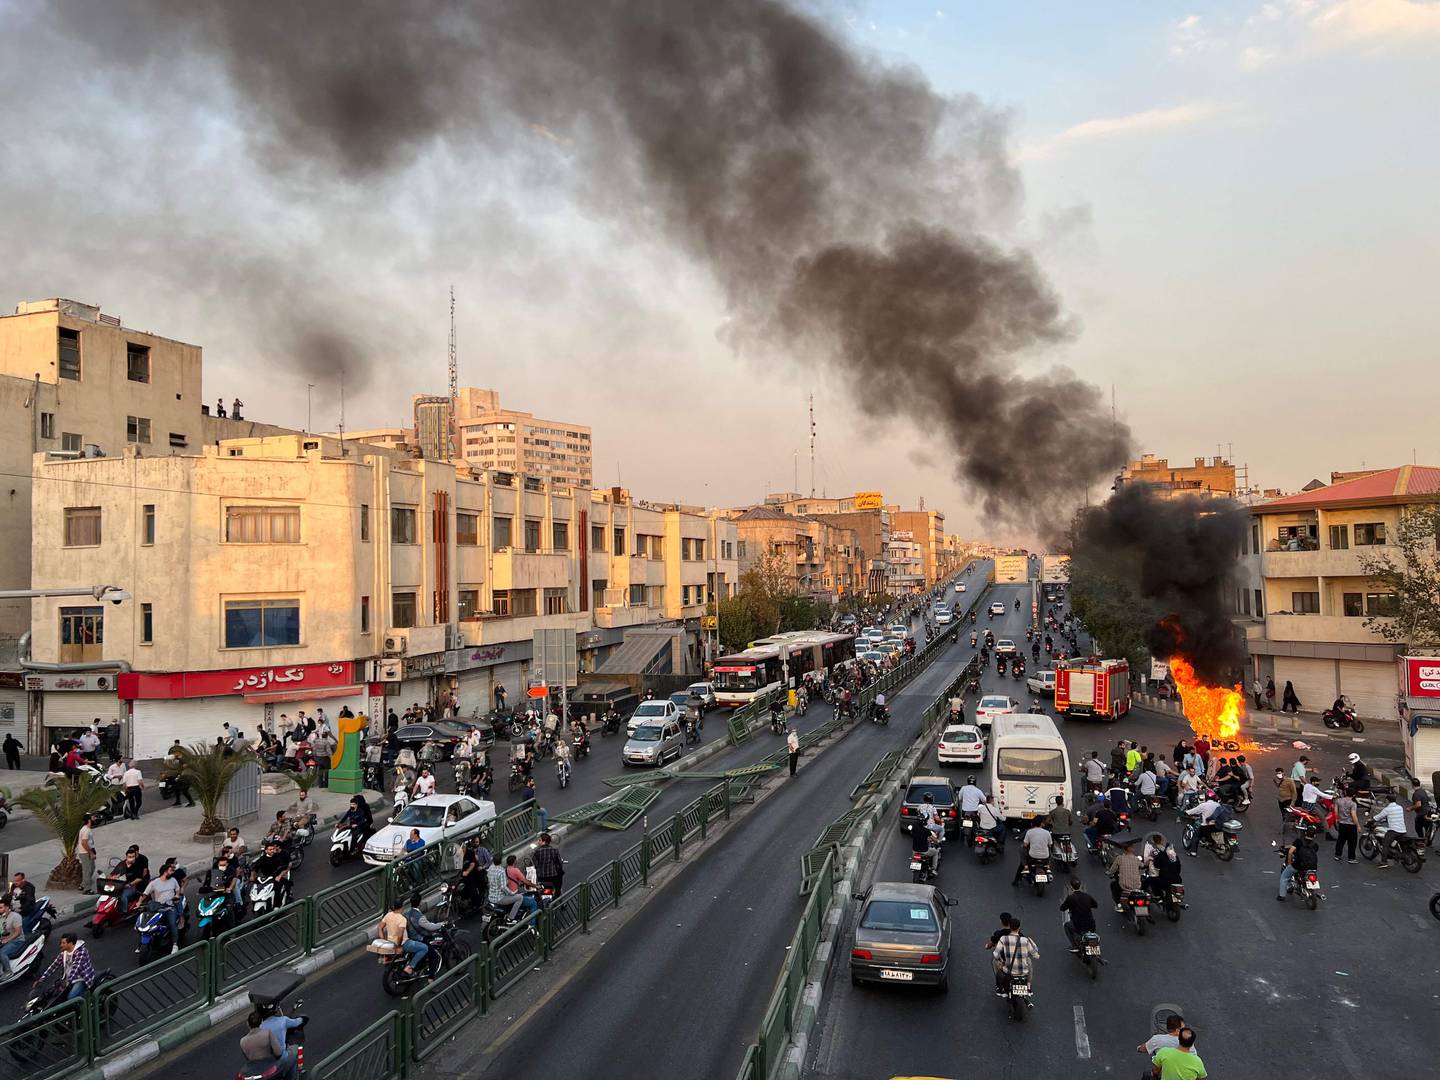 A motorcycle on fire in Iran's capital Tehran, amid the wave of nationwide protests against the government. AFP